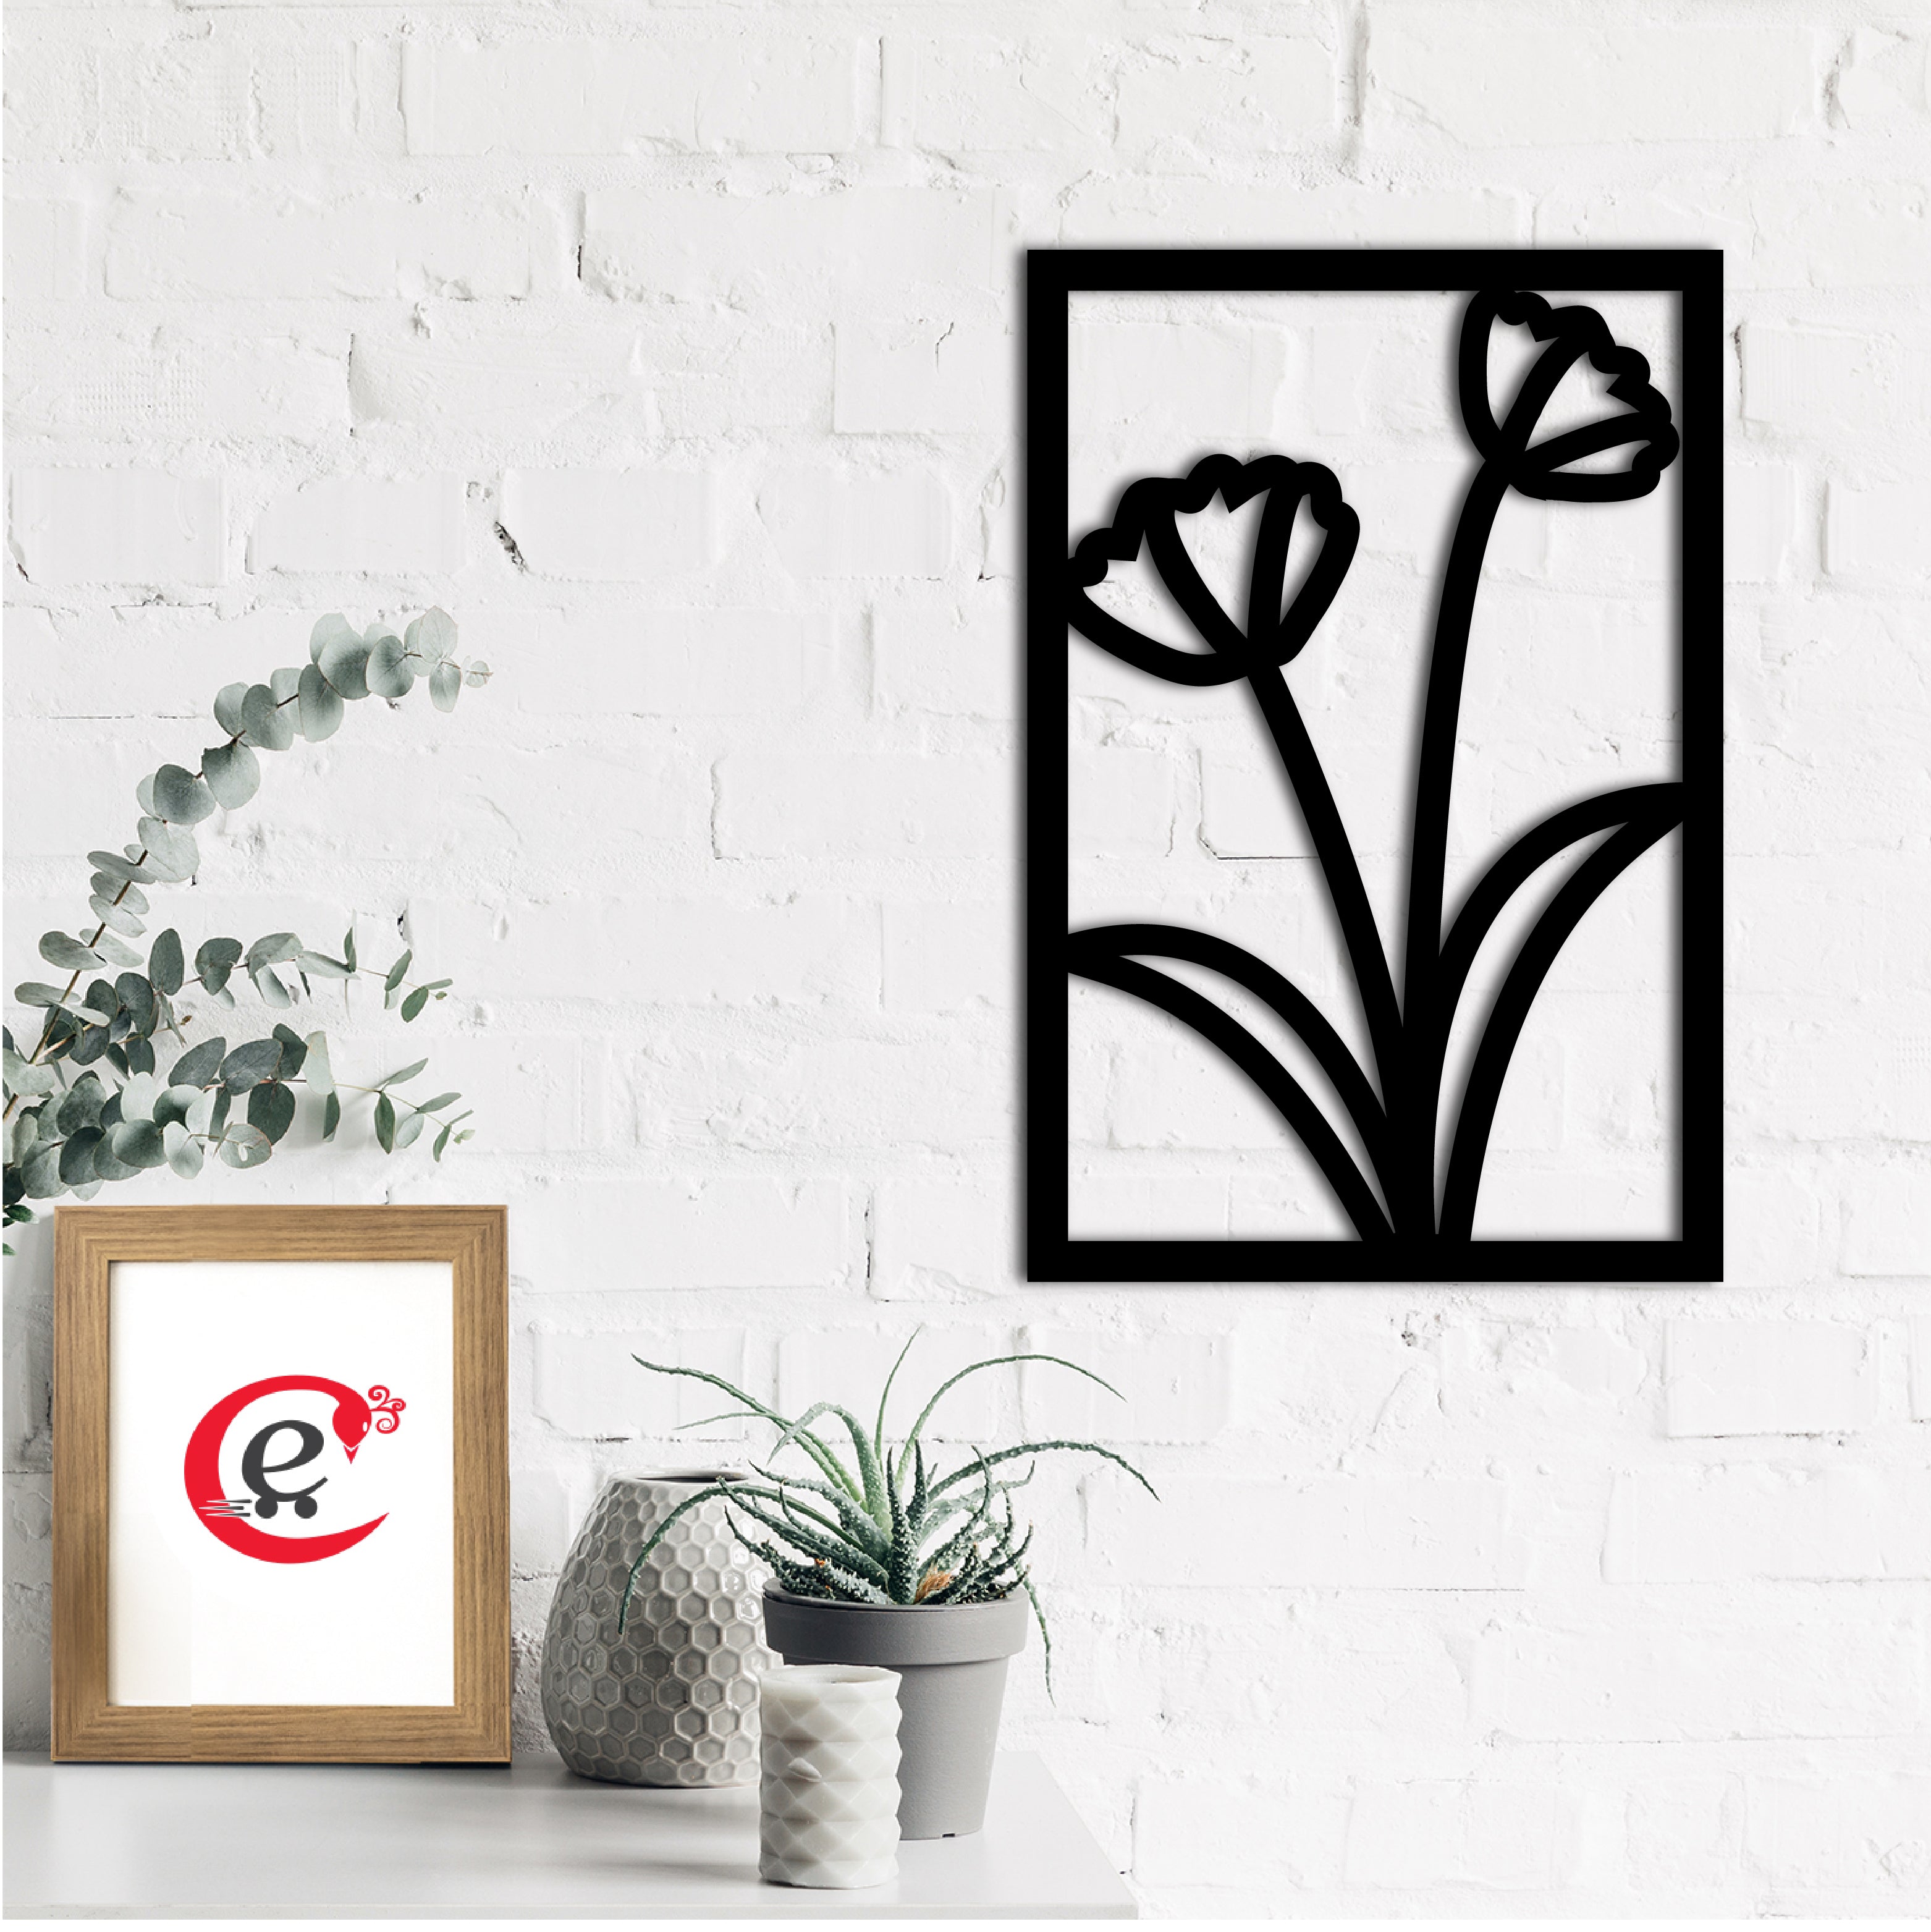 "Flower frame" Black Engineered Wood Wall Art Cutout, Ready to Hang Home Decor